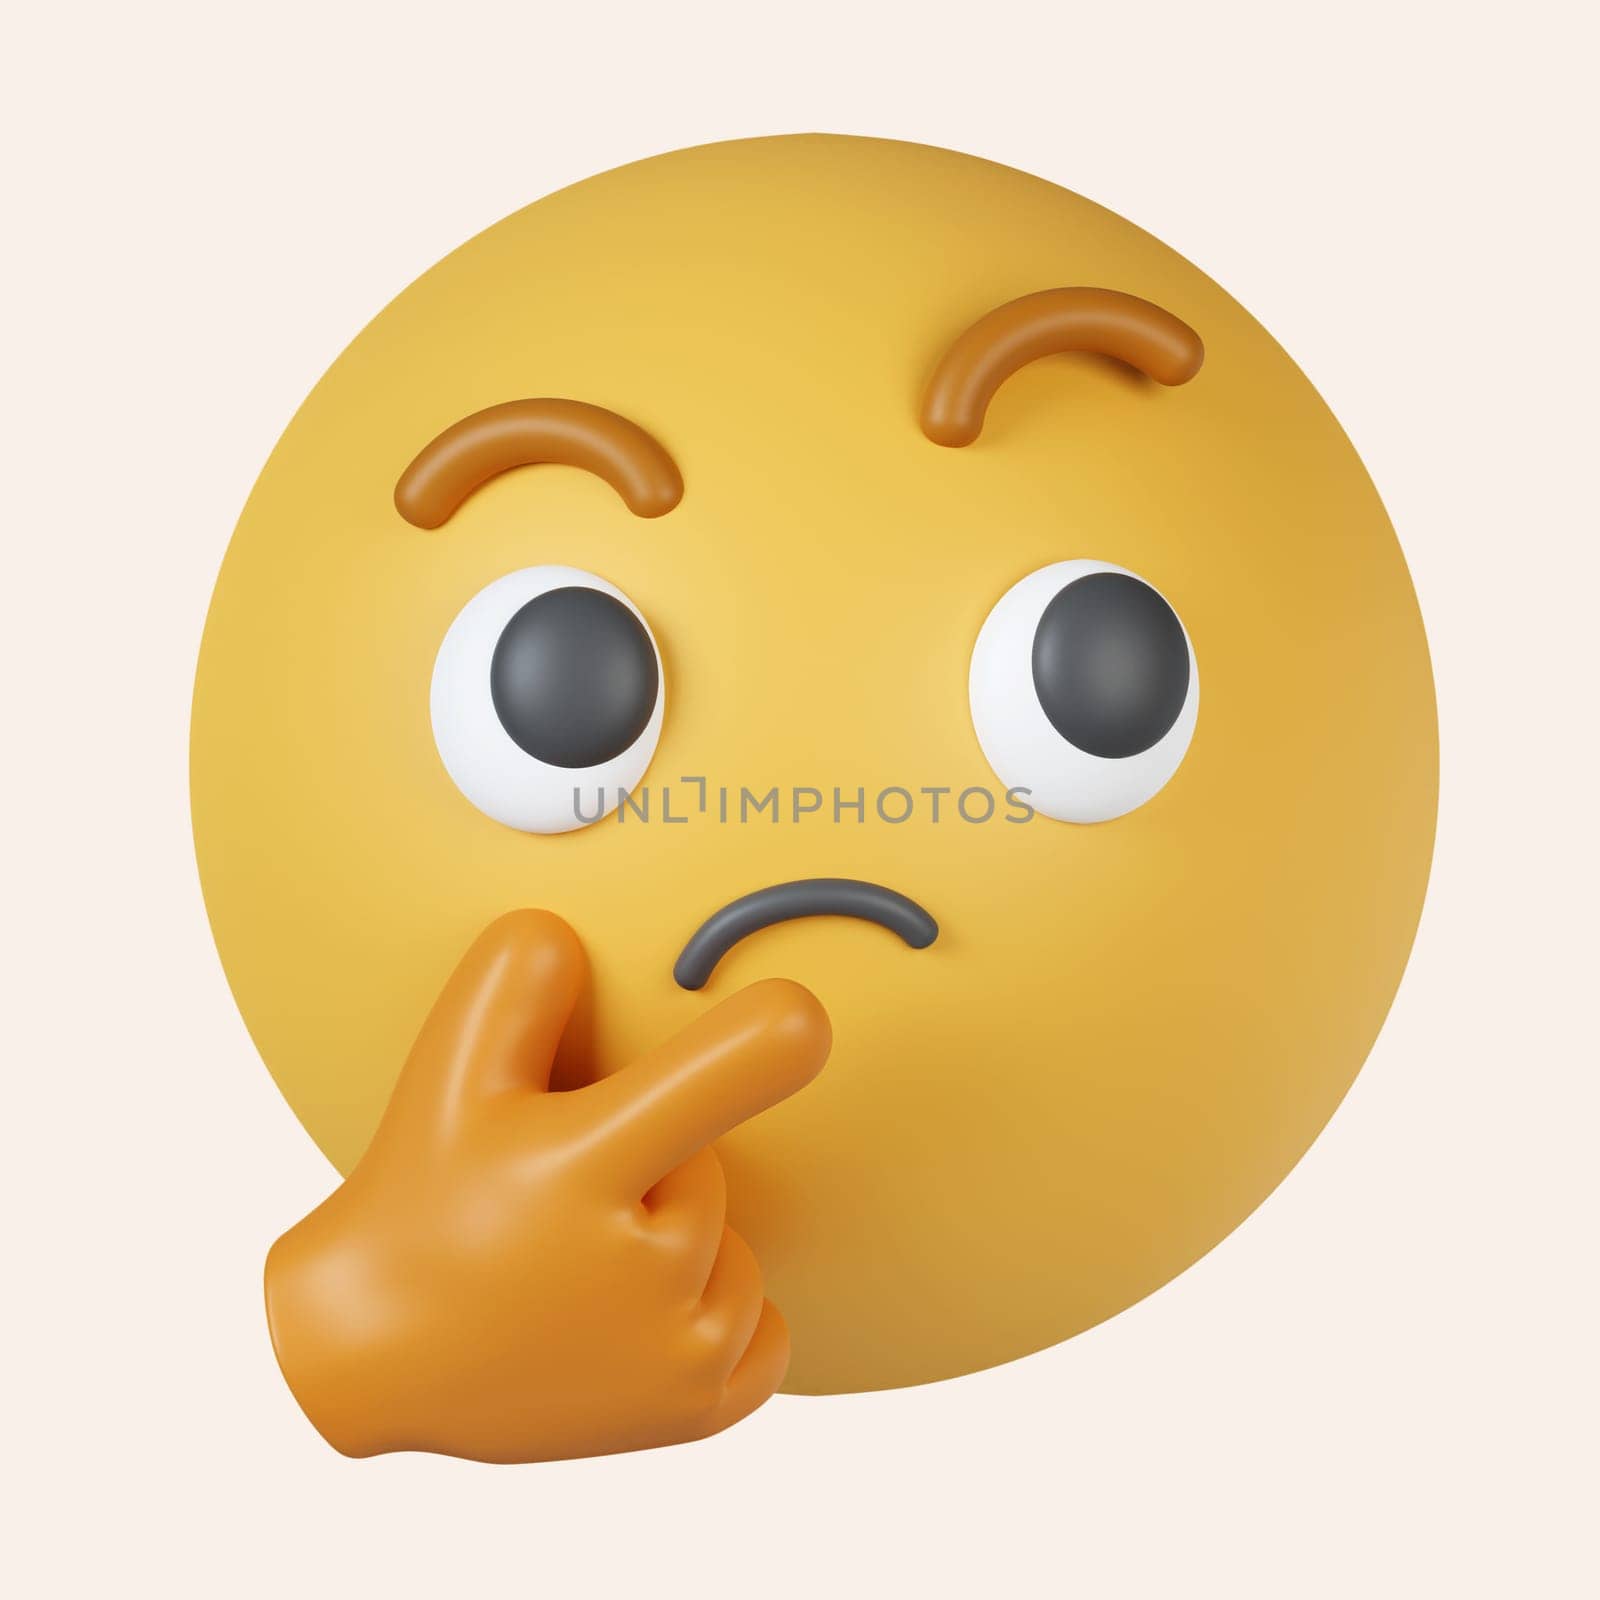 3d Thinking face emoji. emoticon face shown with a single finger and thumb resting on the chin glancing upward. icon isolated on gray background. 3d rendering illustration. Clipping path. by meepiangraphic